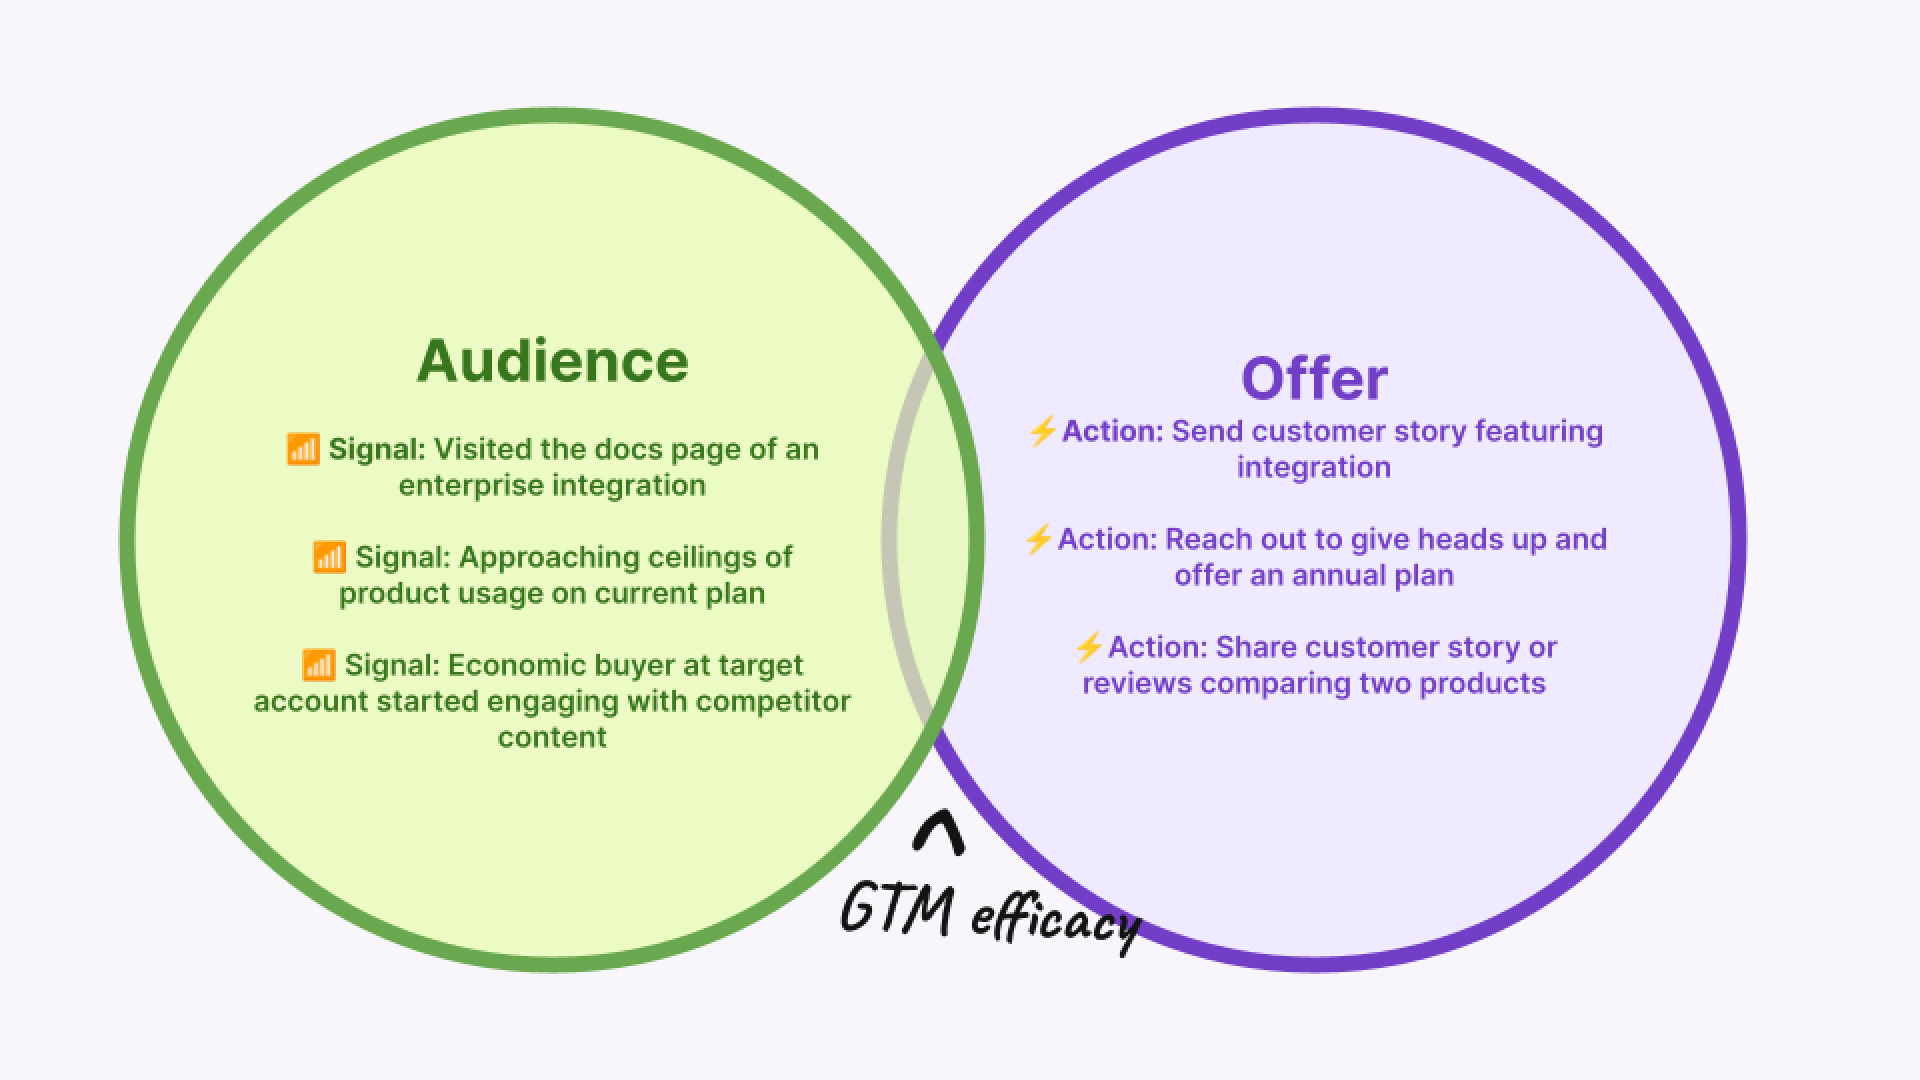 Image of offers based on different audiences